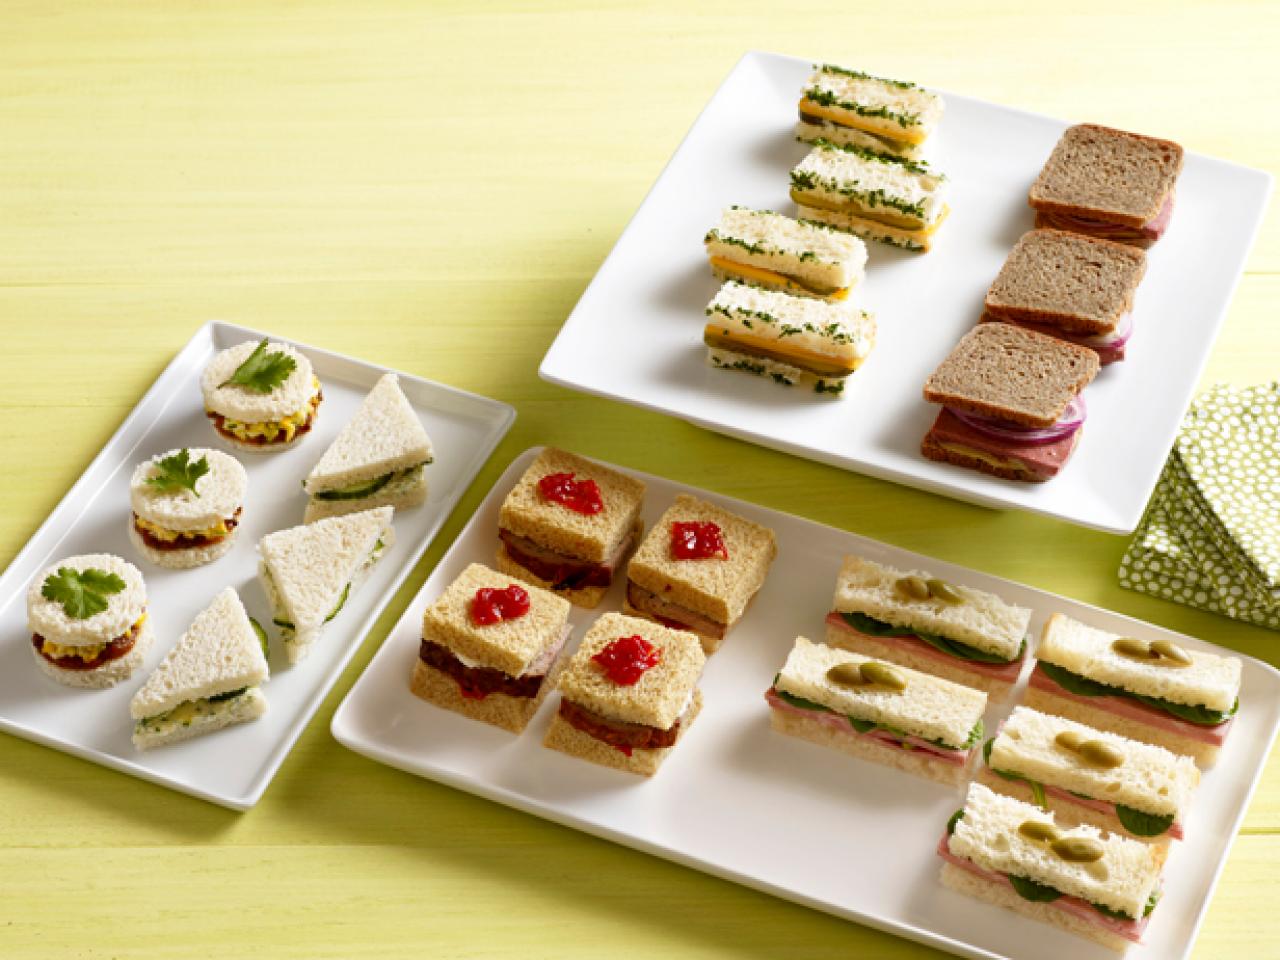 Can We Guess Your Age by Your Taste in Appetizers? finger sandwiches